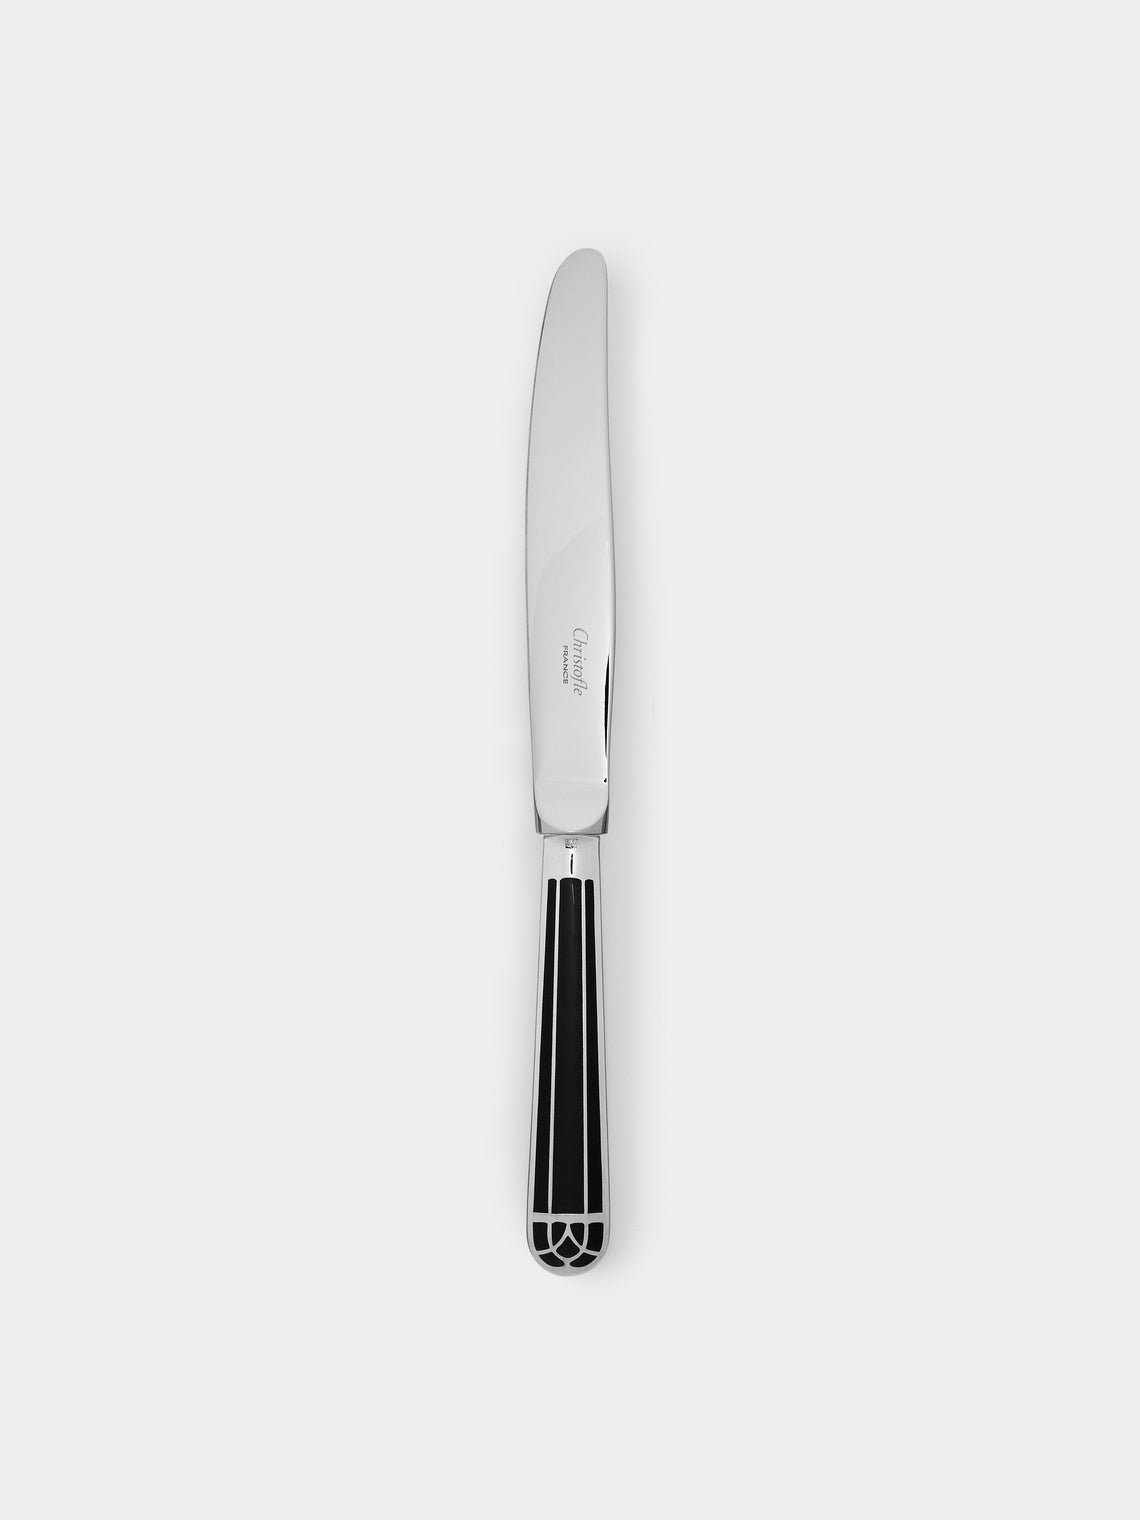 Christofle - Talisman Silver-Plated Dinner Knife - Silver - ABASK - 